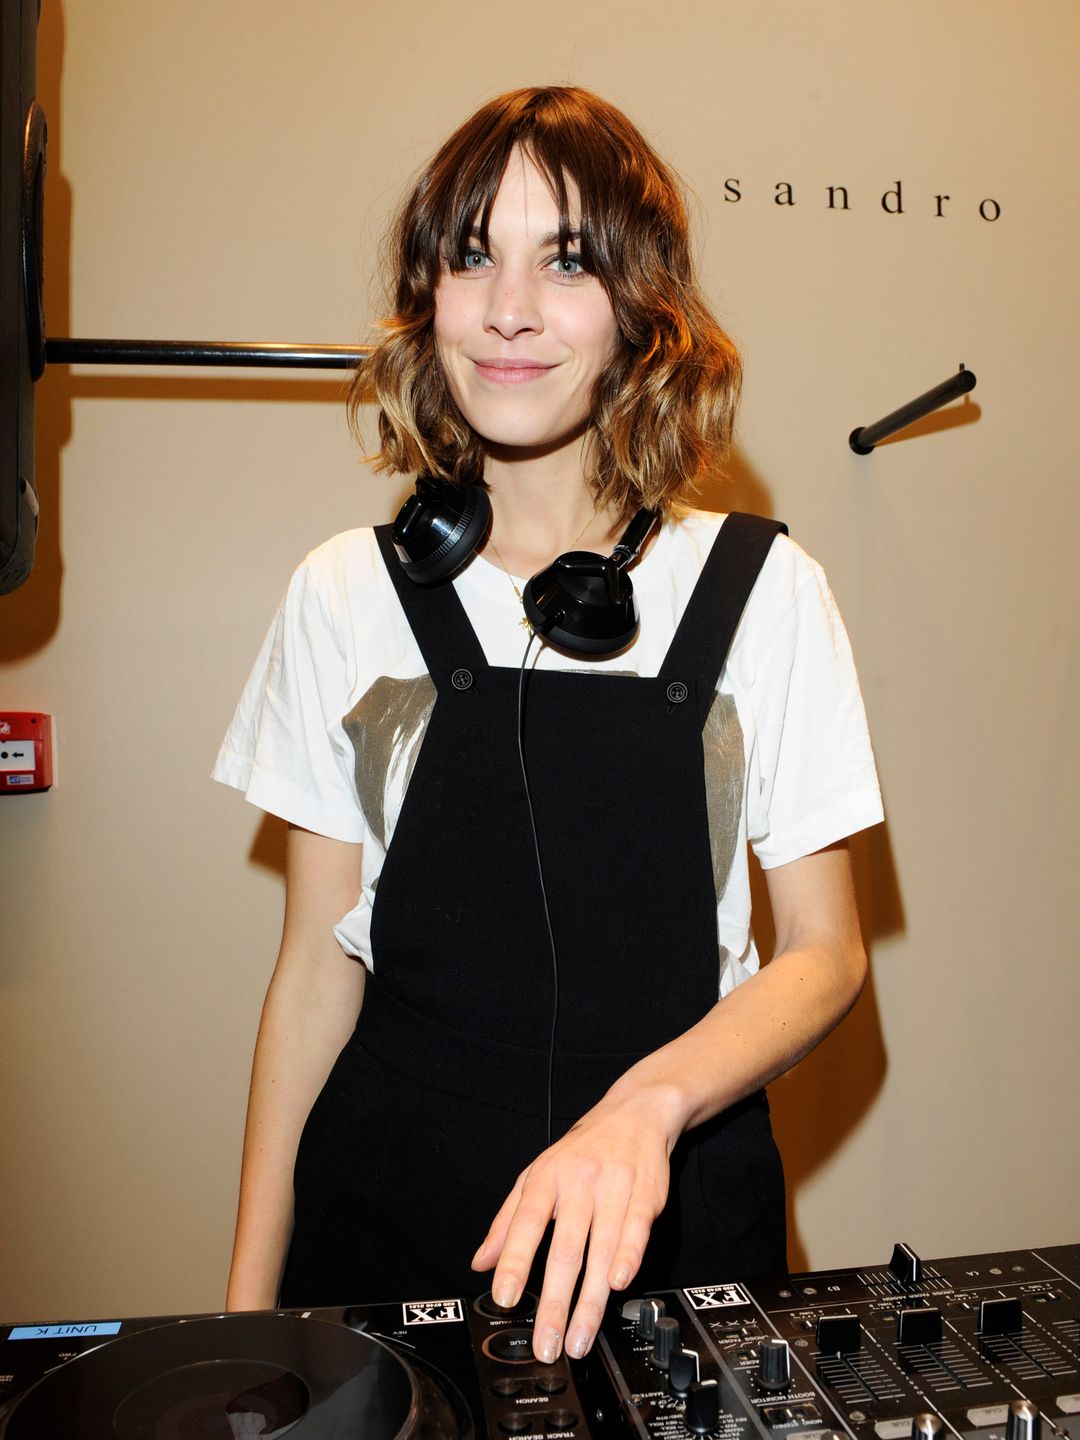 Alexa Chung attends the Sandro flagship boutique launch party at Sandro in Westbourne Grove on November 25, 2010